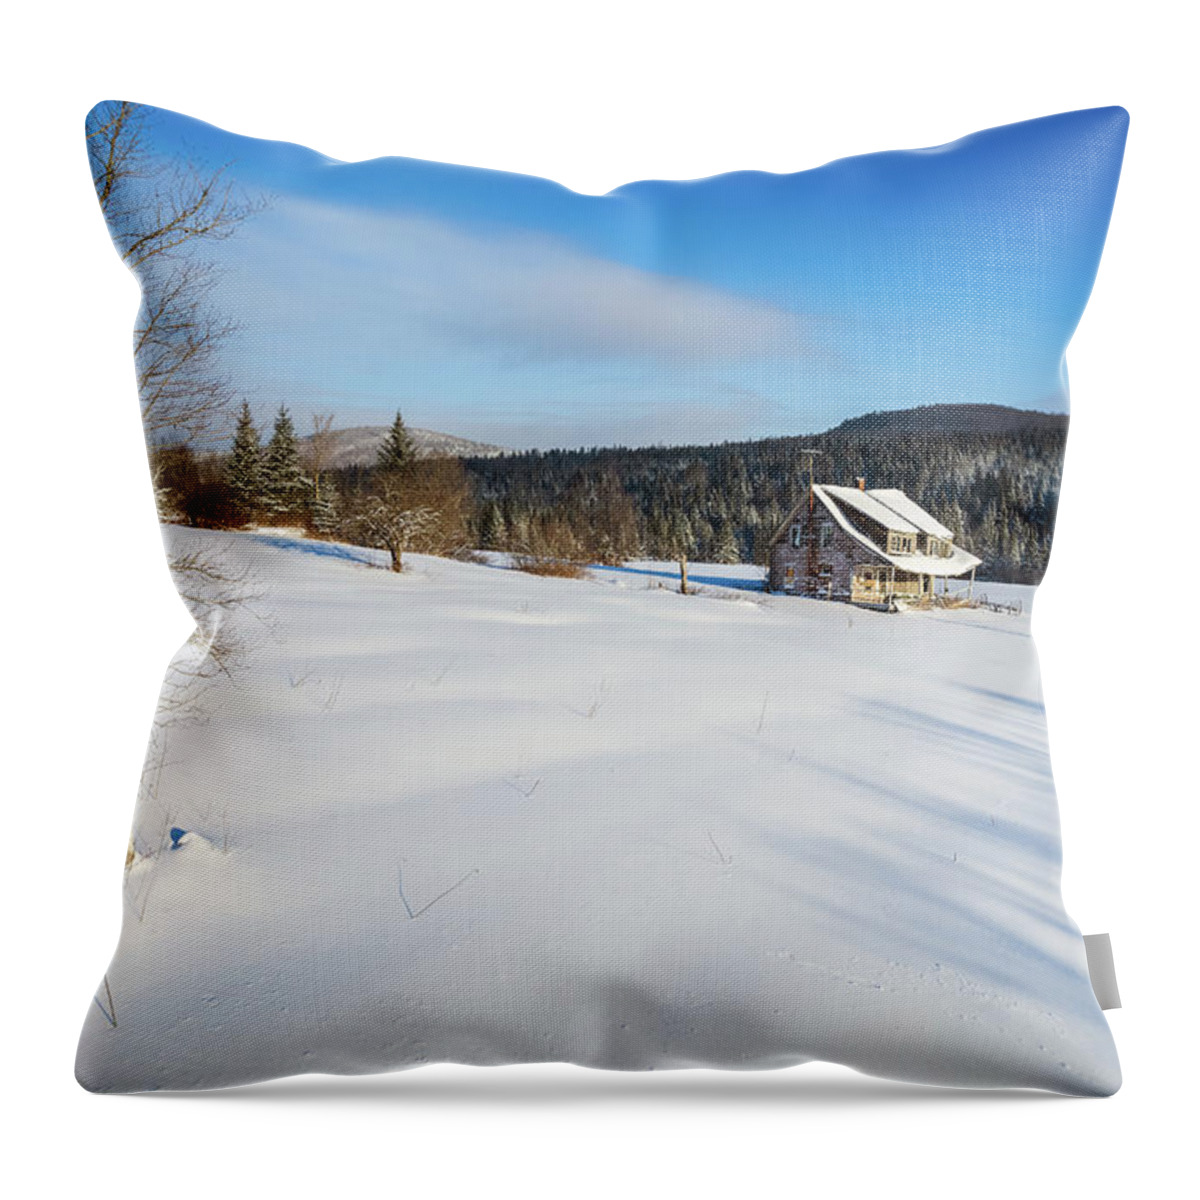 America Throw Pillow featuring the photograph Old Farmhouse - Pittsburg, New Hampshire by John Rowe